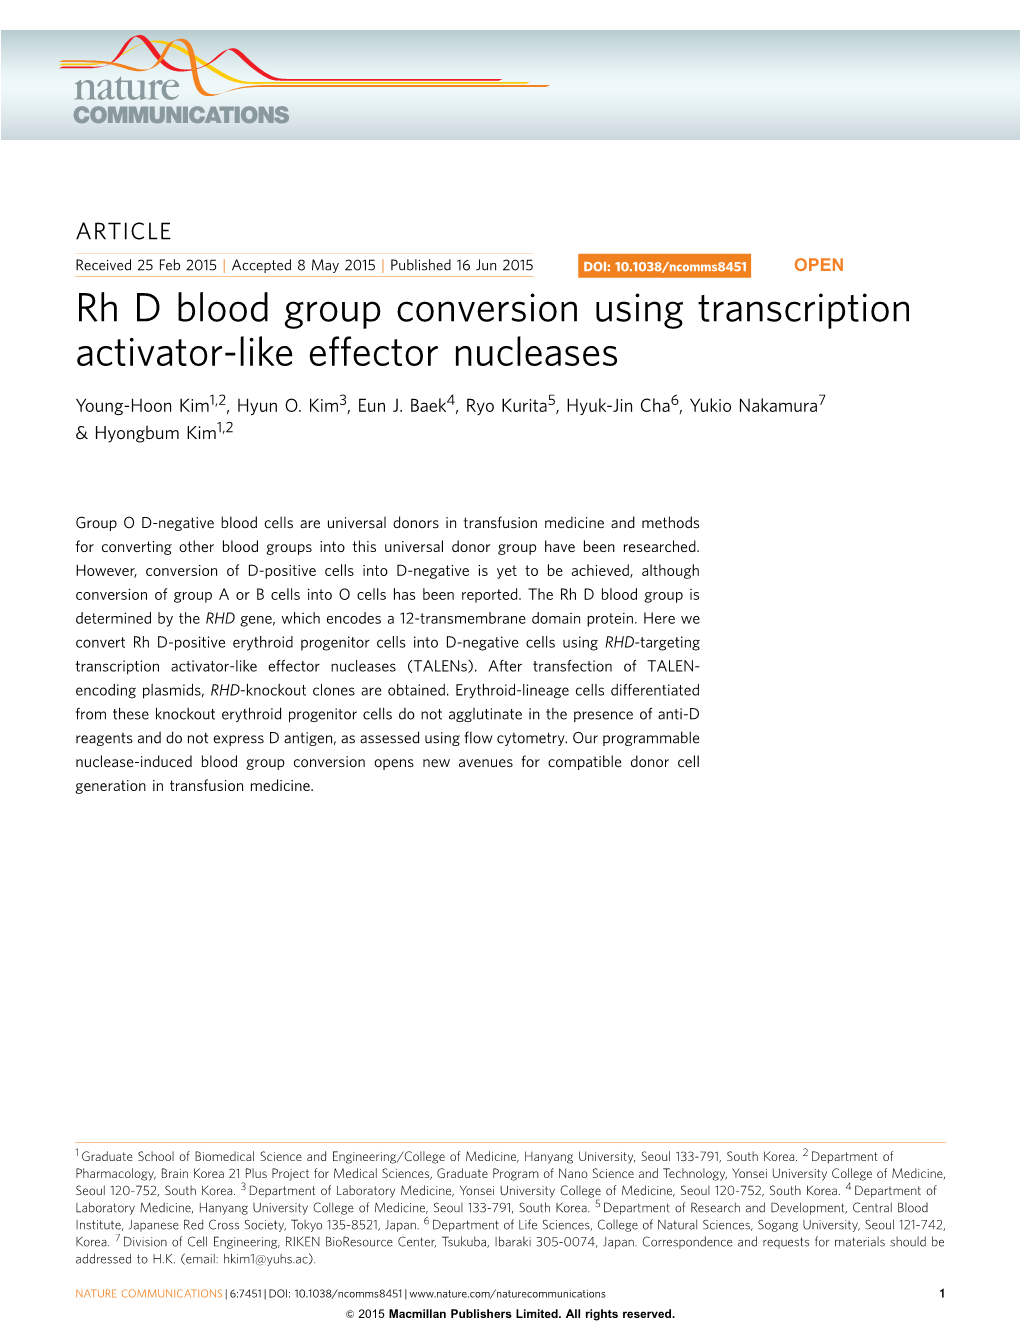 Rh D Blood Group Conversion Using Transcription Activator-Like Effector Nucleases